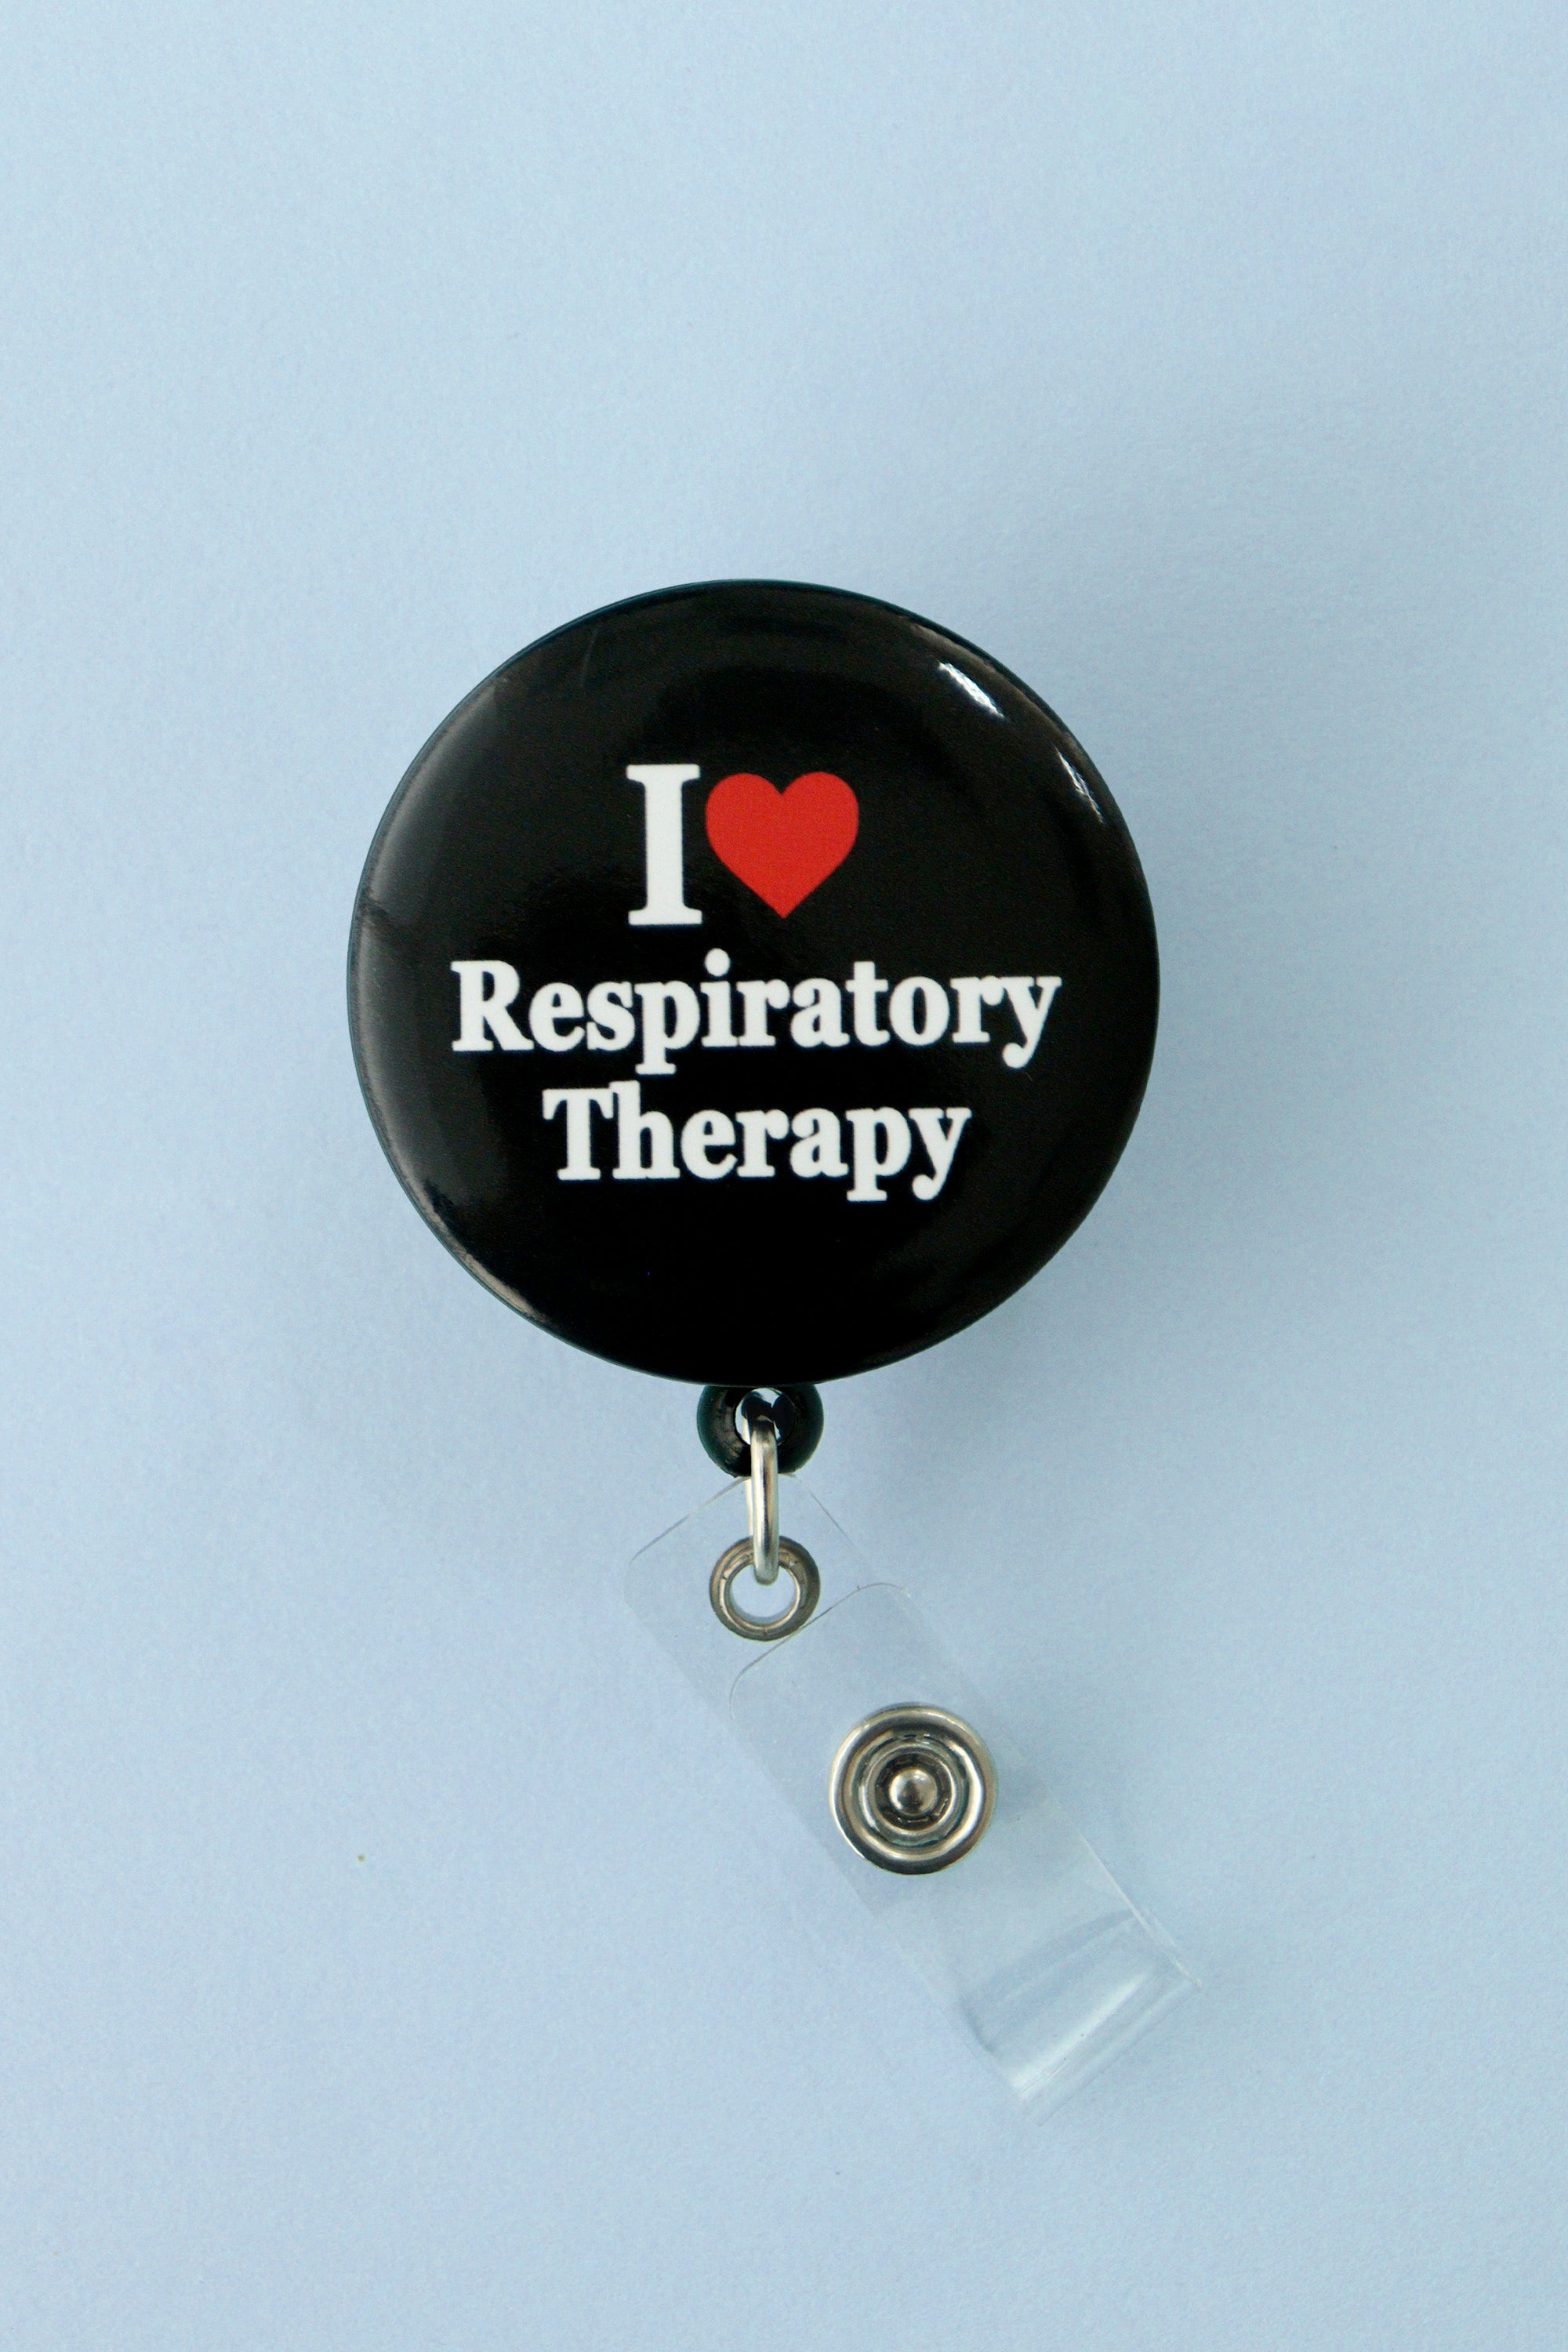 products-respiratorytherapy1-960696-jpg